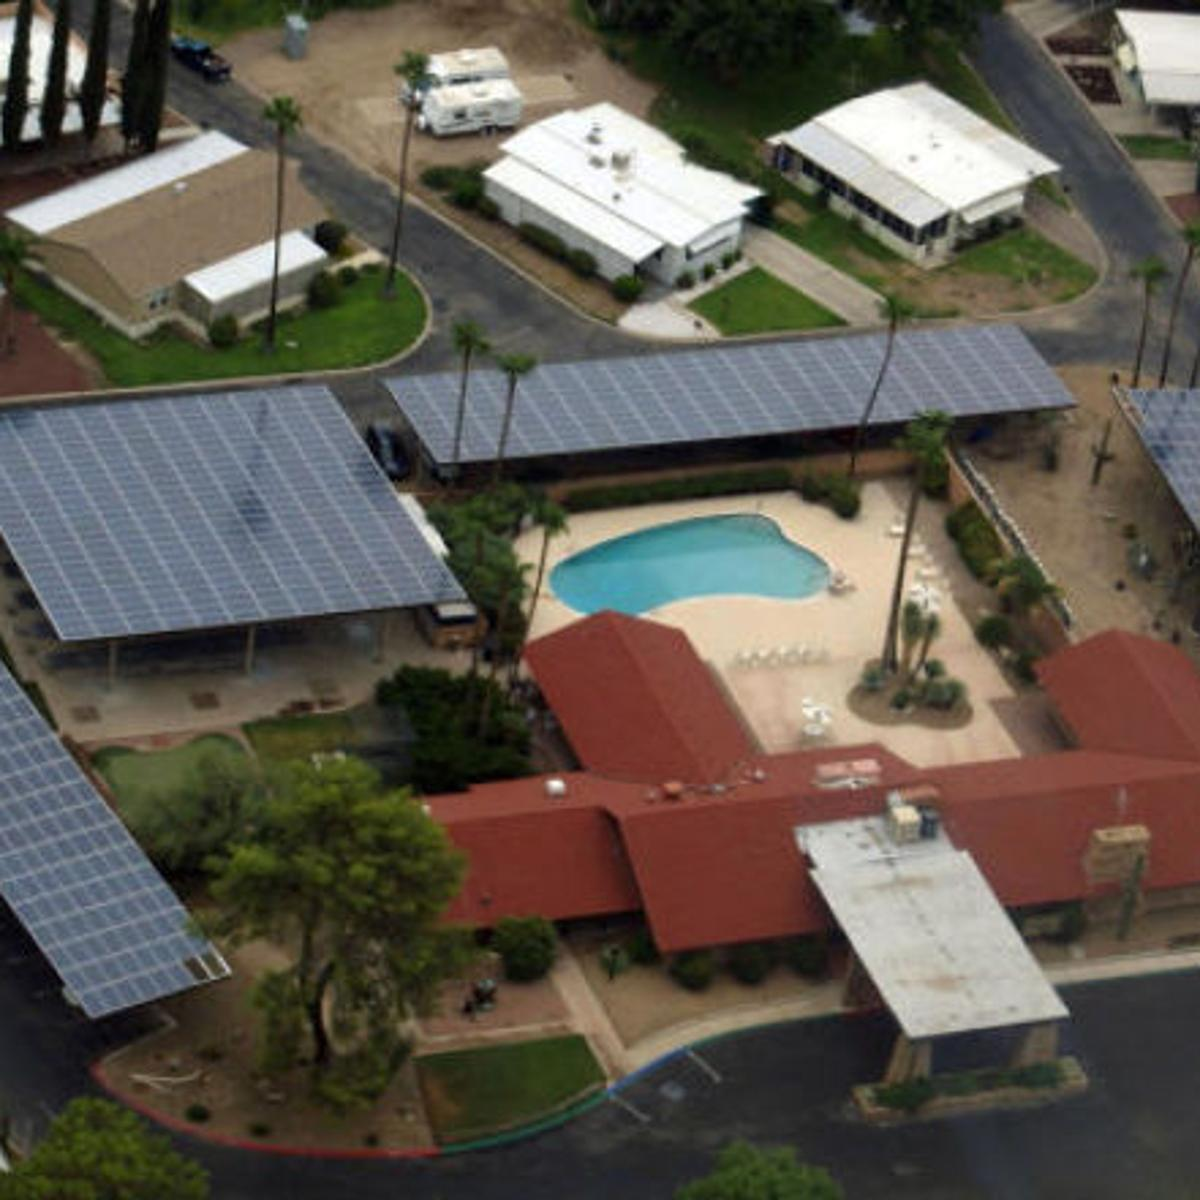 Solar Panels for Mobile Homes: Can This Be?